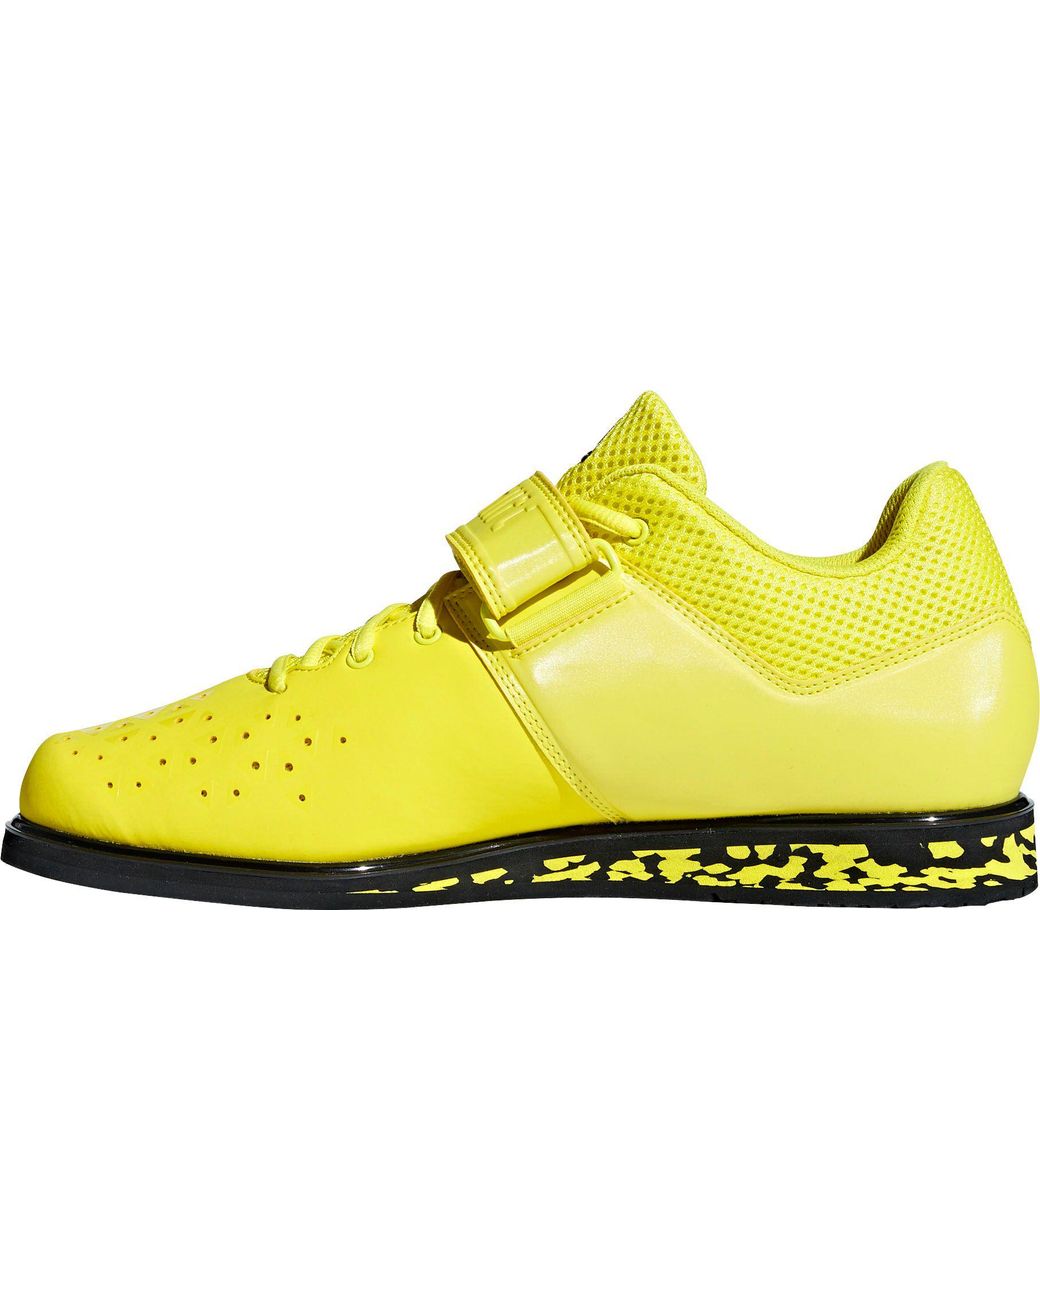 adidas Synthetic Powerlift 3.1 Weightlifting Shoes in Yellow/Black (Yellow)  for Men | Lyst